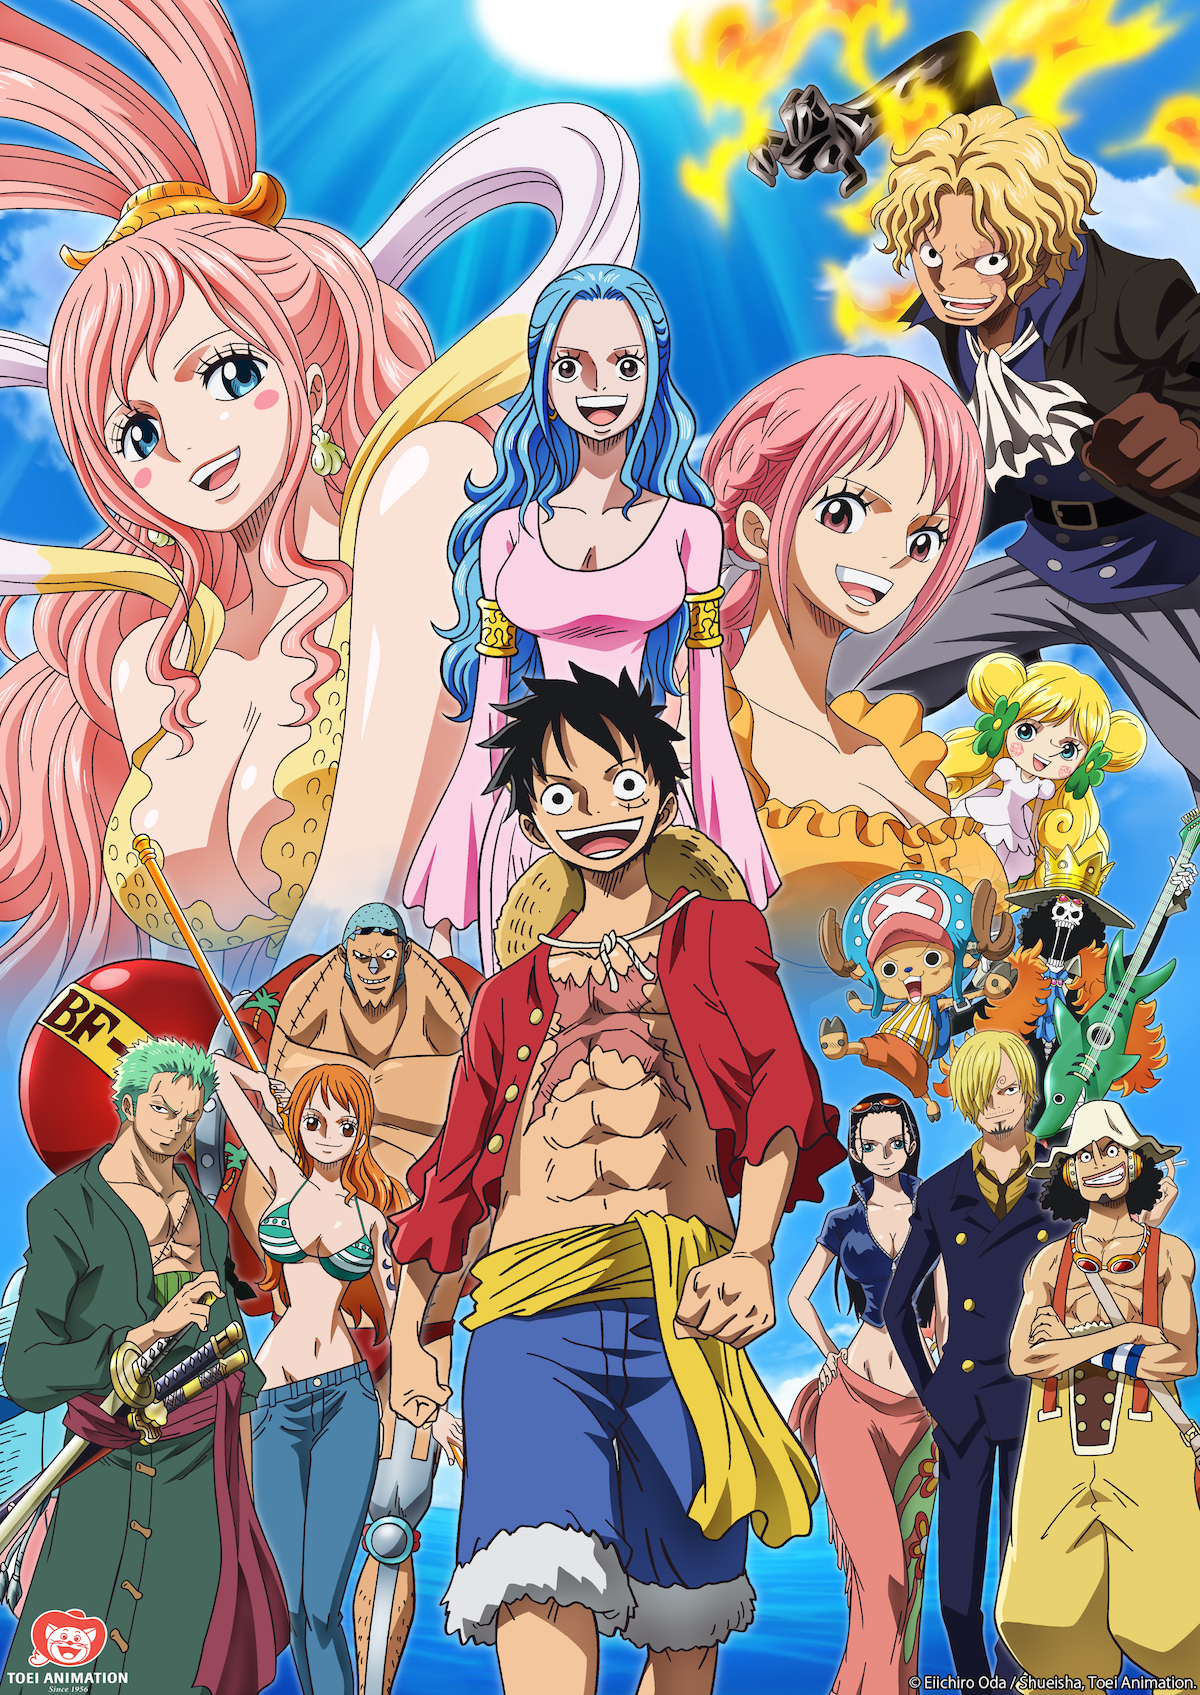 New One Piece Visual Leads into the Anime's Next Arc